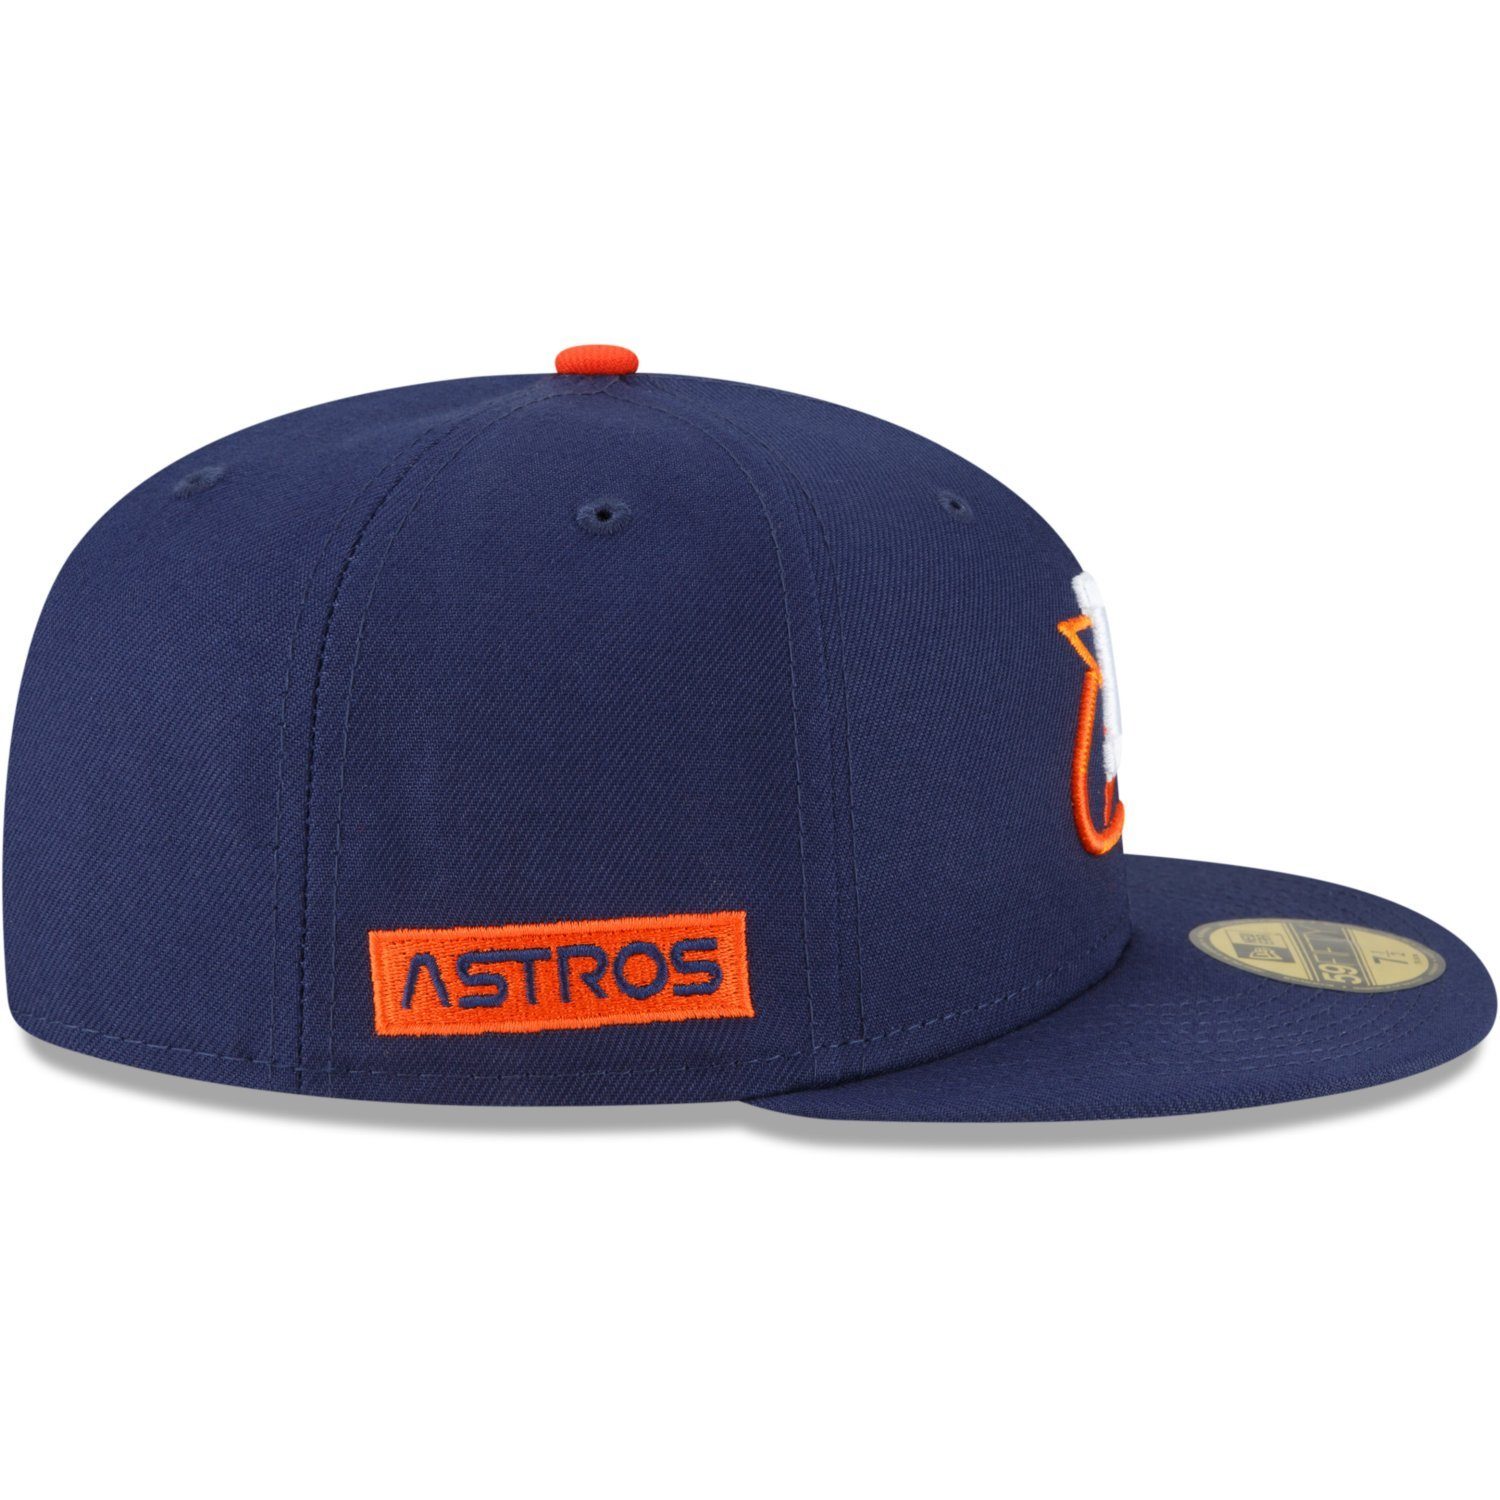 CITY Houston Astros 59Fifty Fitted Cap New CONNECT Era